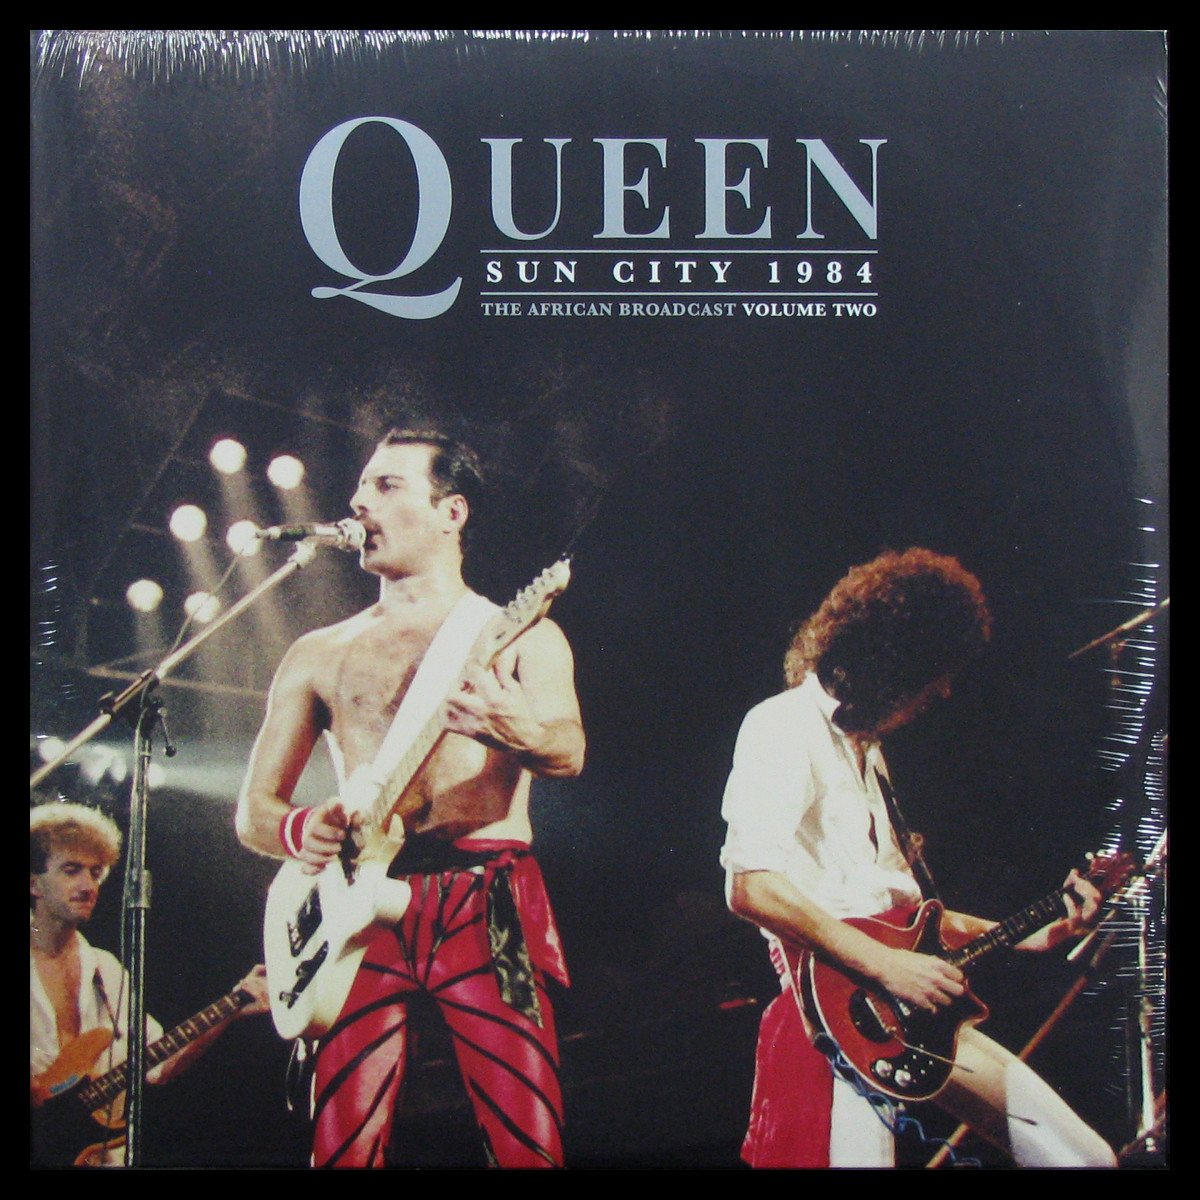 LP Queen — Sun City 1984 - The African Broadcast Volume Two фото